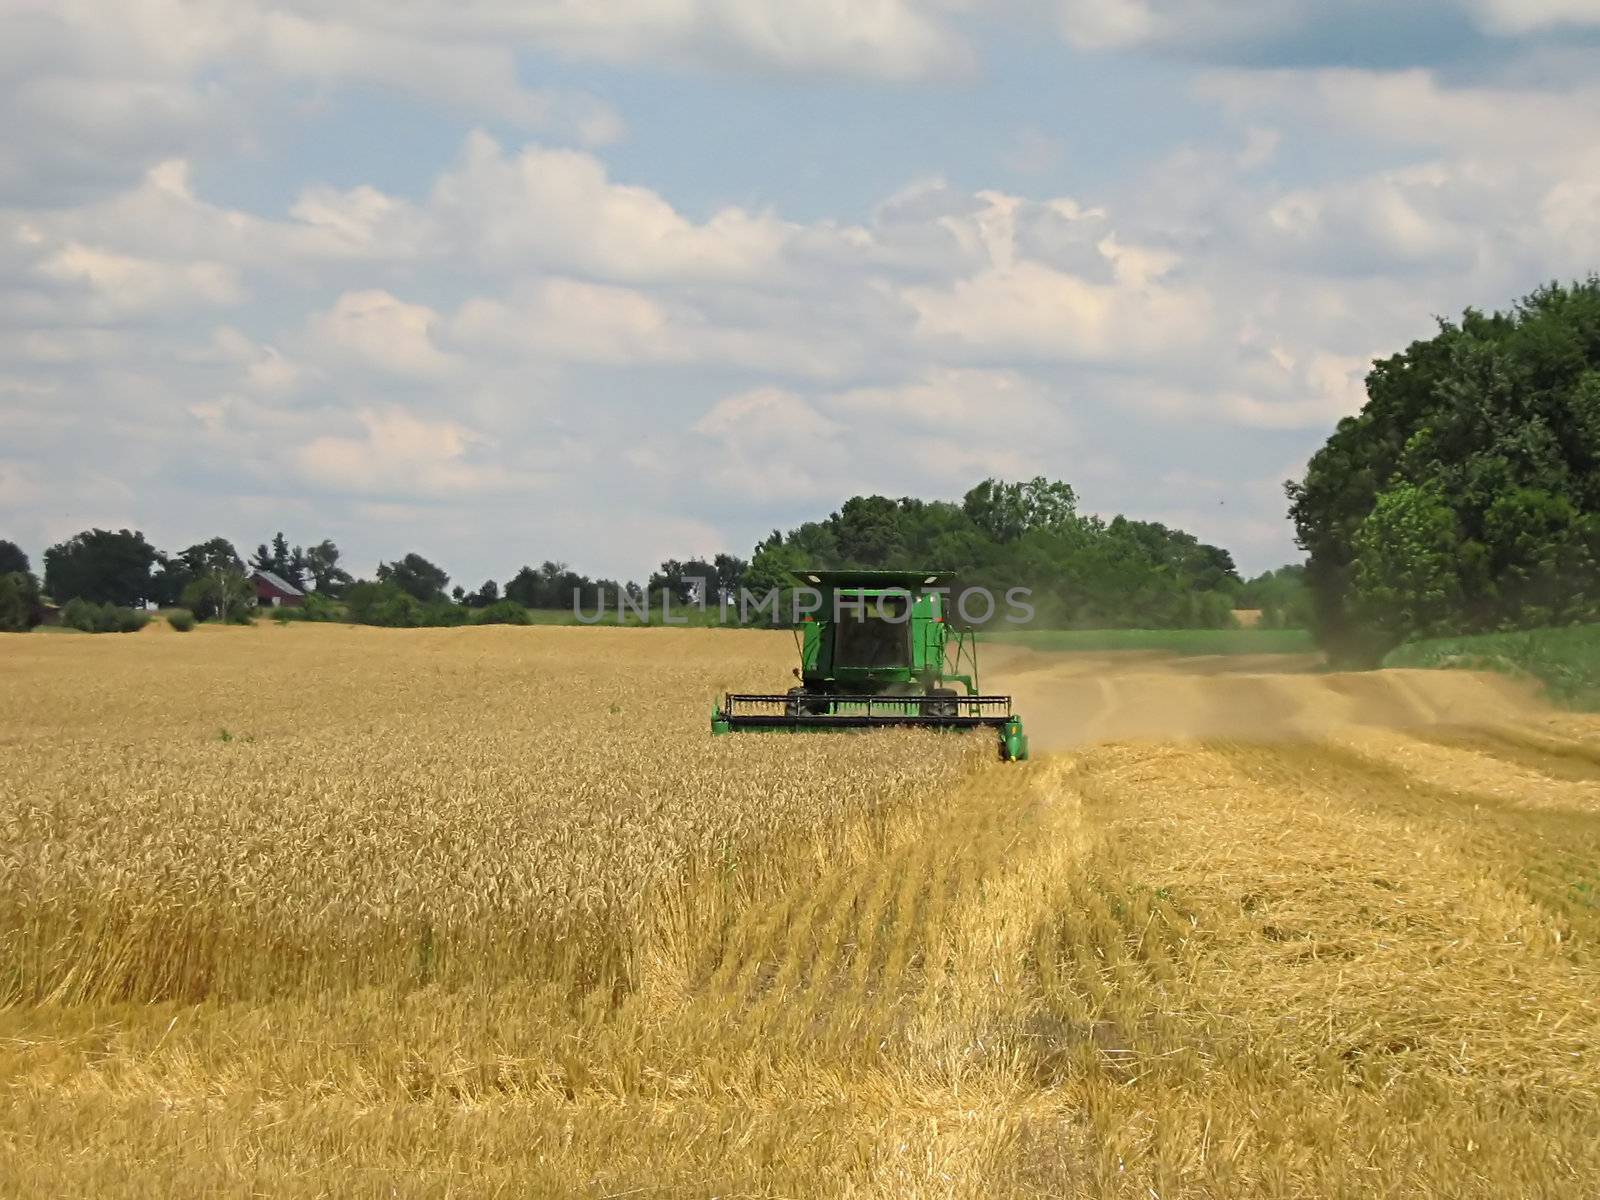 A photograph of a combine harvesting crops.